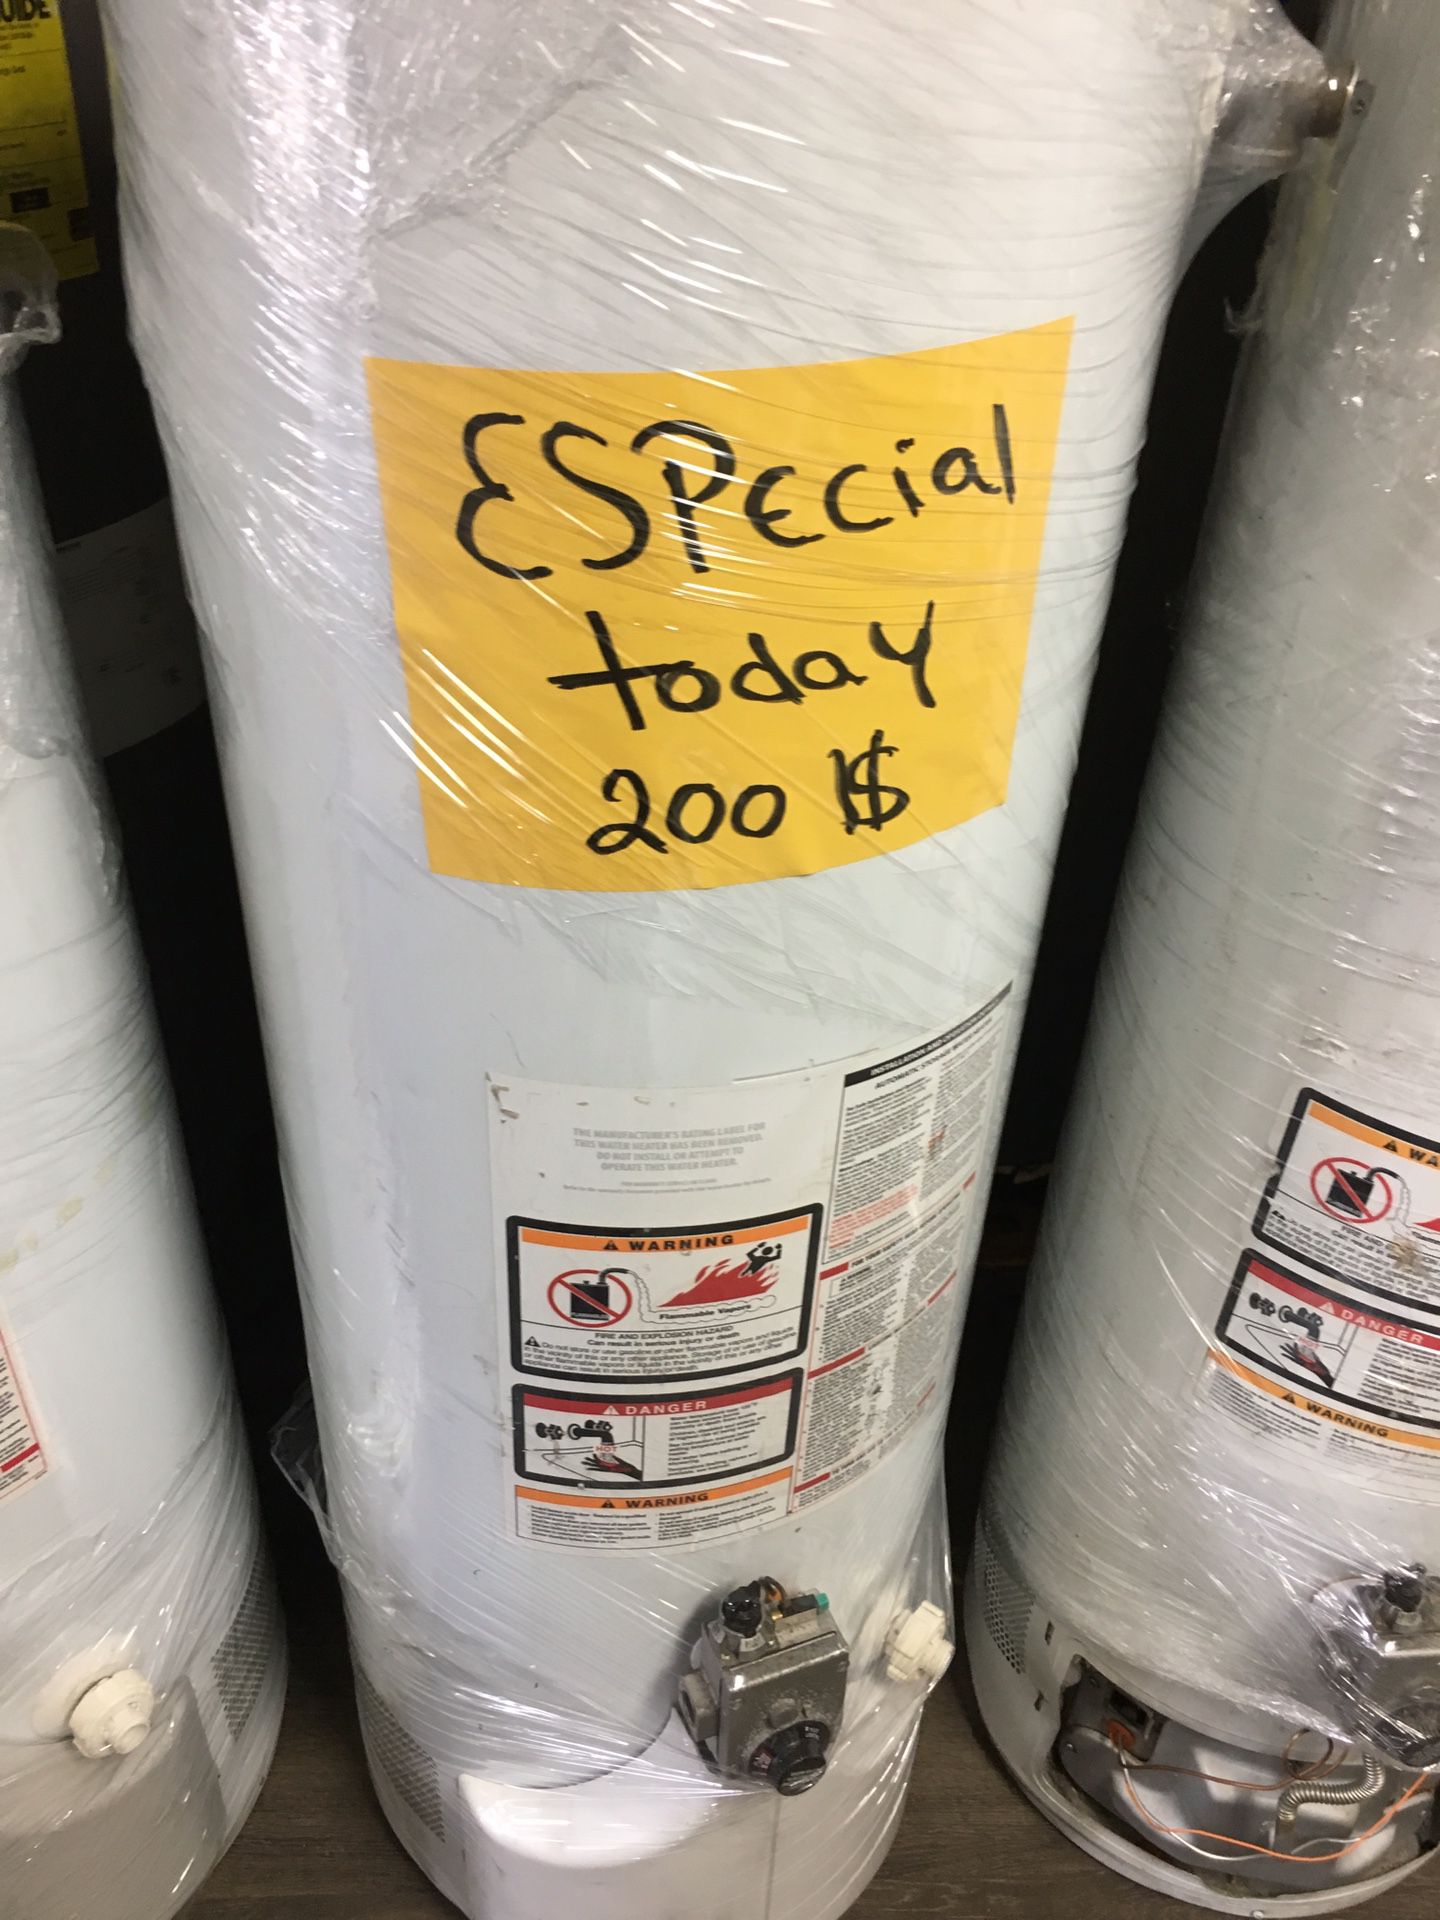 Especial today water heater for 200 1 year warranty